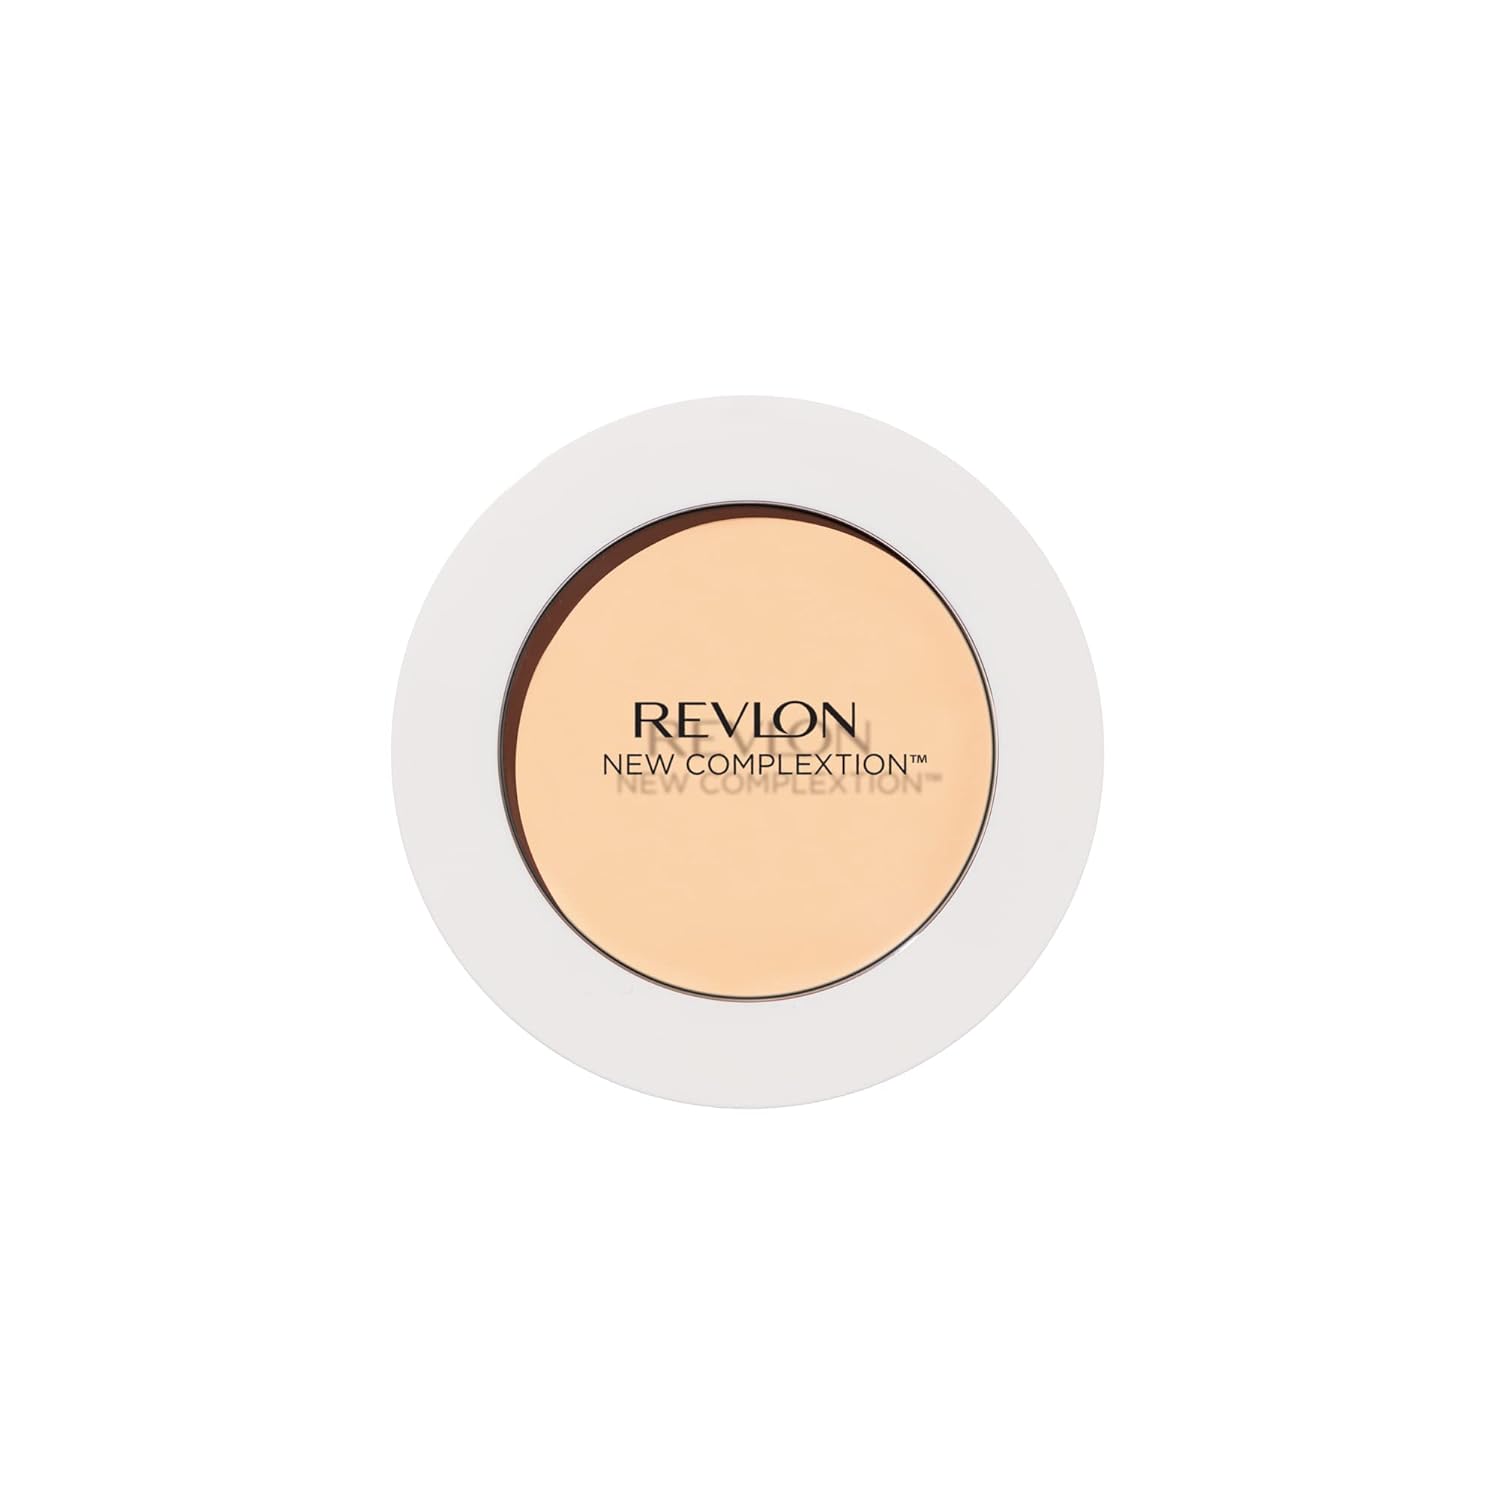 Revlon Foundation, New Complexion One-Step Face Makeup, Longwear Light Coverage with Matte Finish, SPF 15, Cream to Powder Formula, Oil Free, 001 Ivory Beige, 0.35 Oz